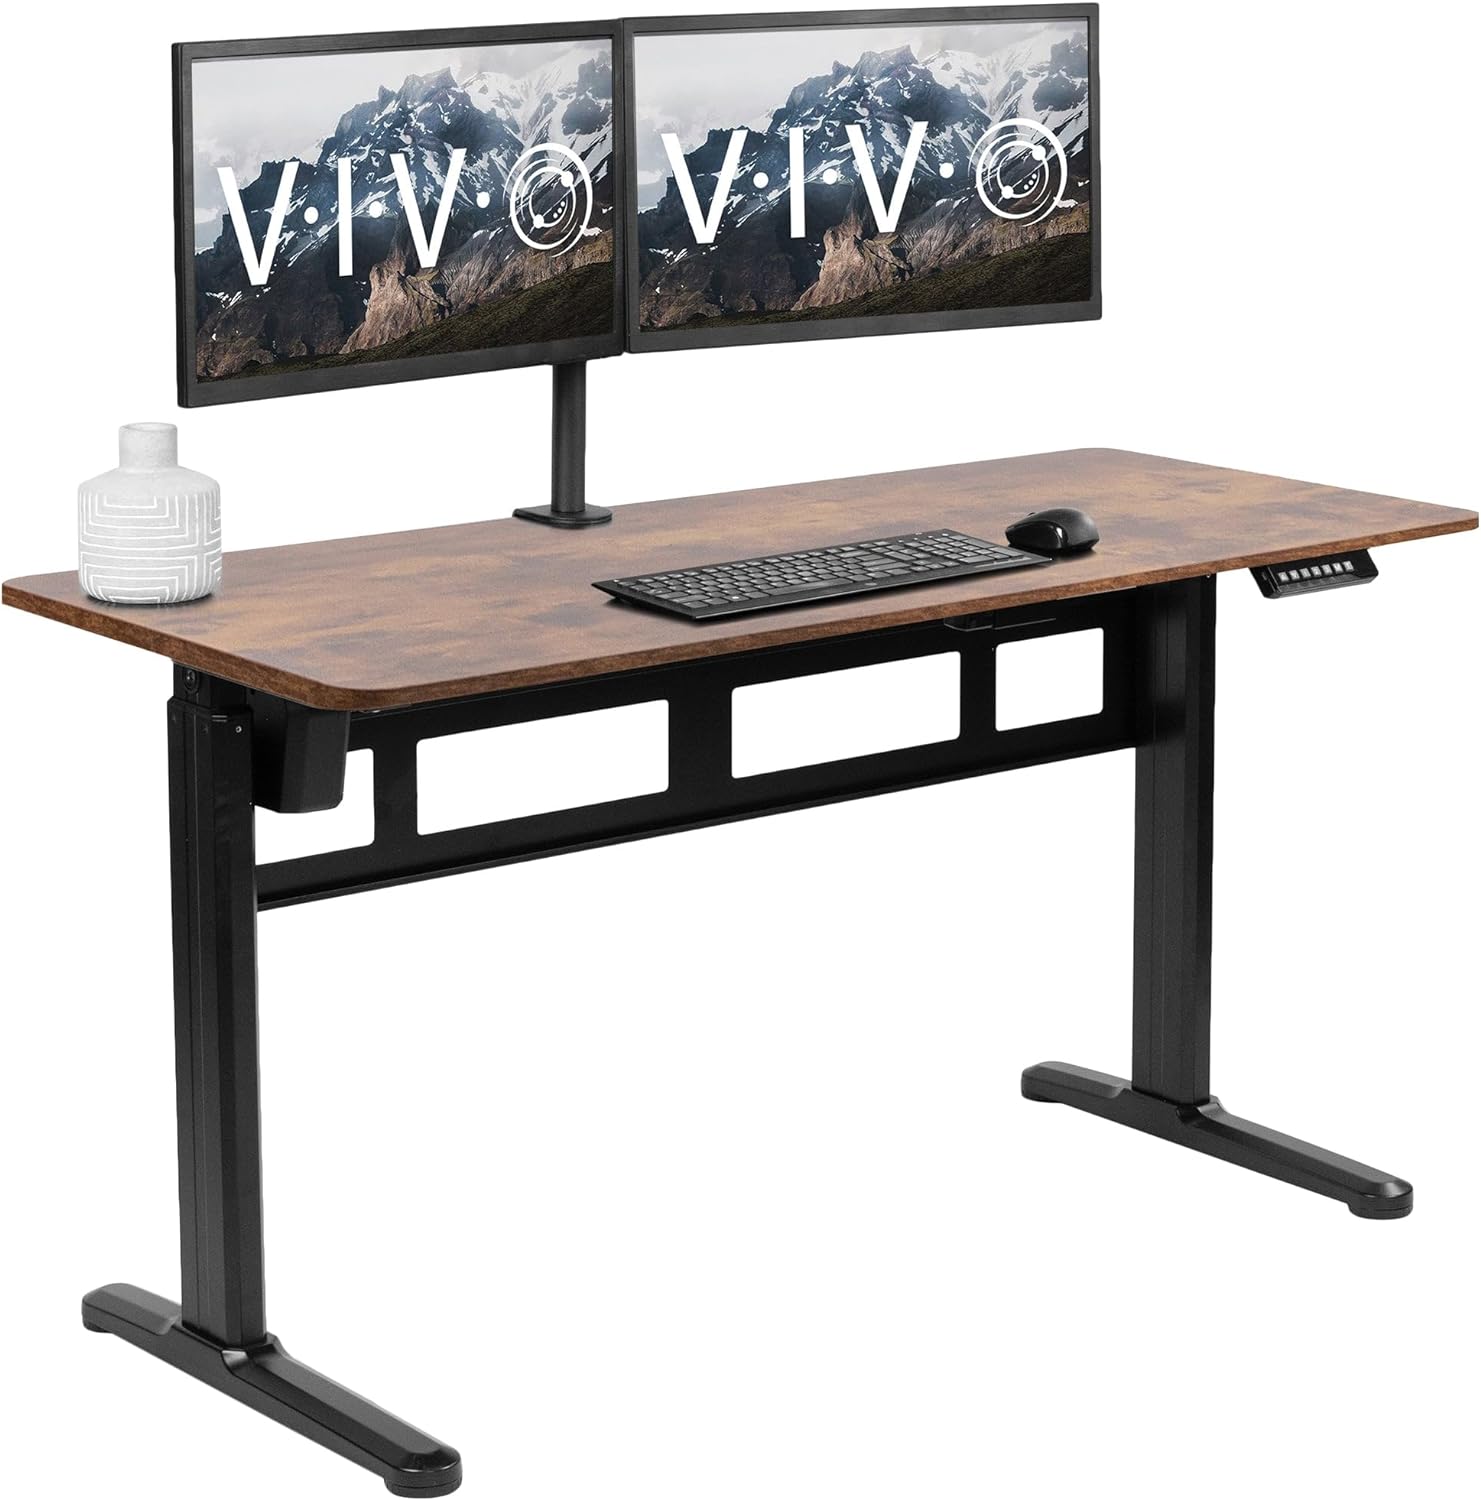 VIVO Electric 55 x 24 inch Stand Up Desk, Height Adjustable Standing Home & Office Workstation with Memory Controller, Rustic Vintage Brown Top, Black Frame, DESK-E155TN $129.99